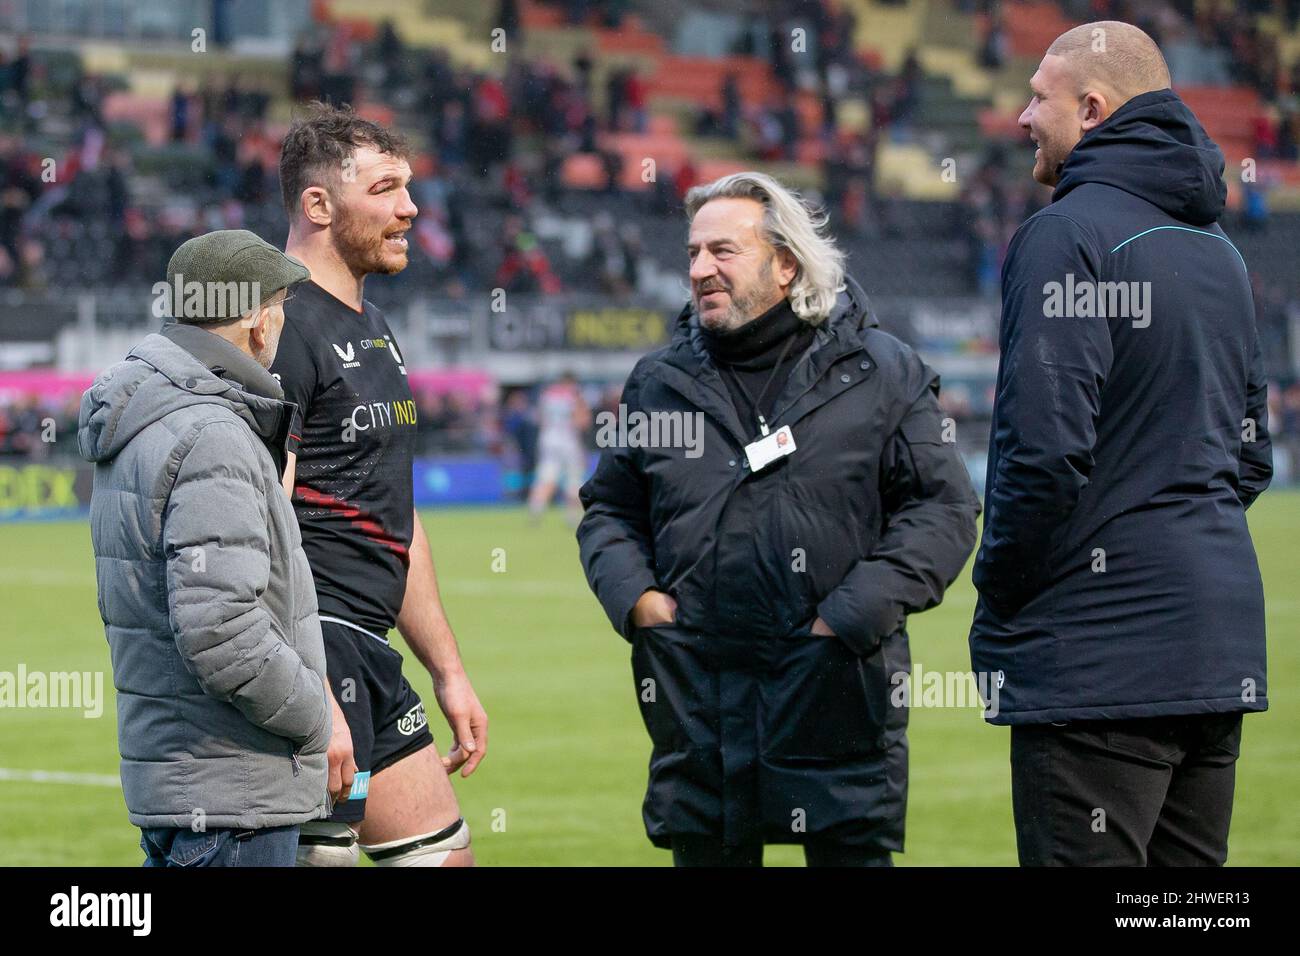 Barnet, United Kingdom. 05th Mar, 2022. Gallagher Premiership Rugby. Saracens V Leicester Tigers. StoneX Stadium. Barnet. Property Investor and Chairman of Prestbury Investment Holdings Limited Nick Leslau talks to Tim Swinson of Saracens at full time on the pitch Credit: Sport In Pictures/Alamy Live News Stock Photo